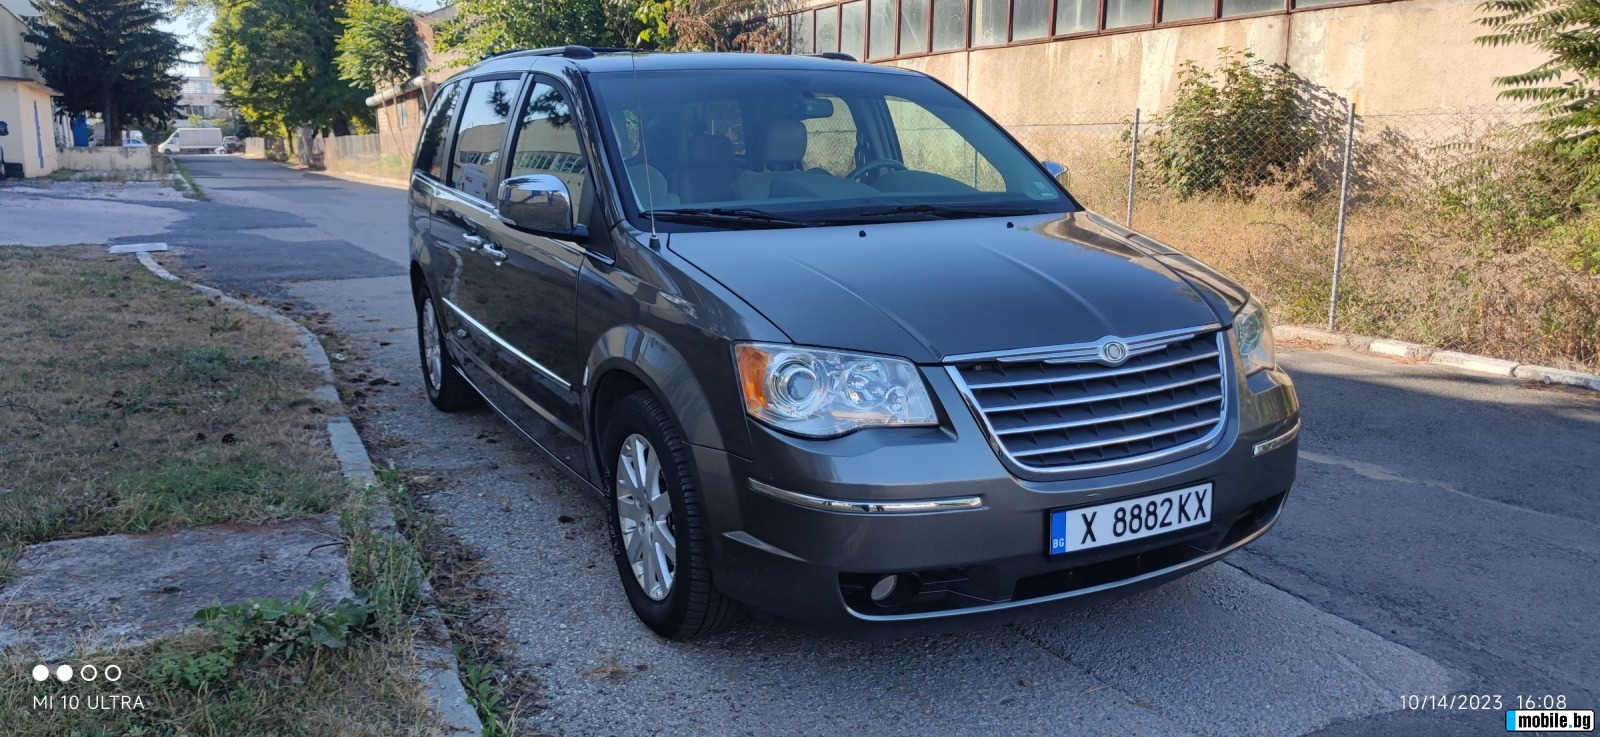 Chrysler Town and Country 4.0 Limited LPG | Mobile.bg   3